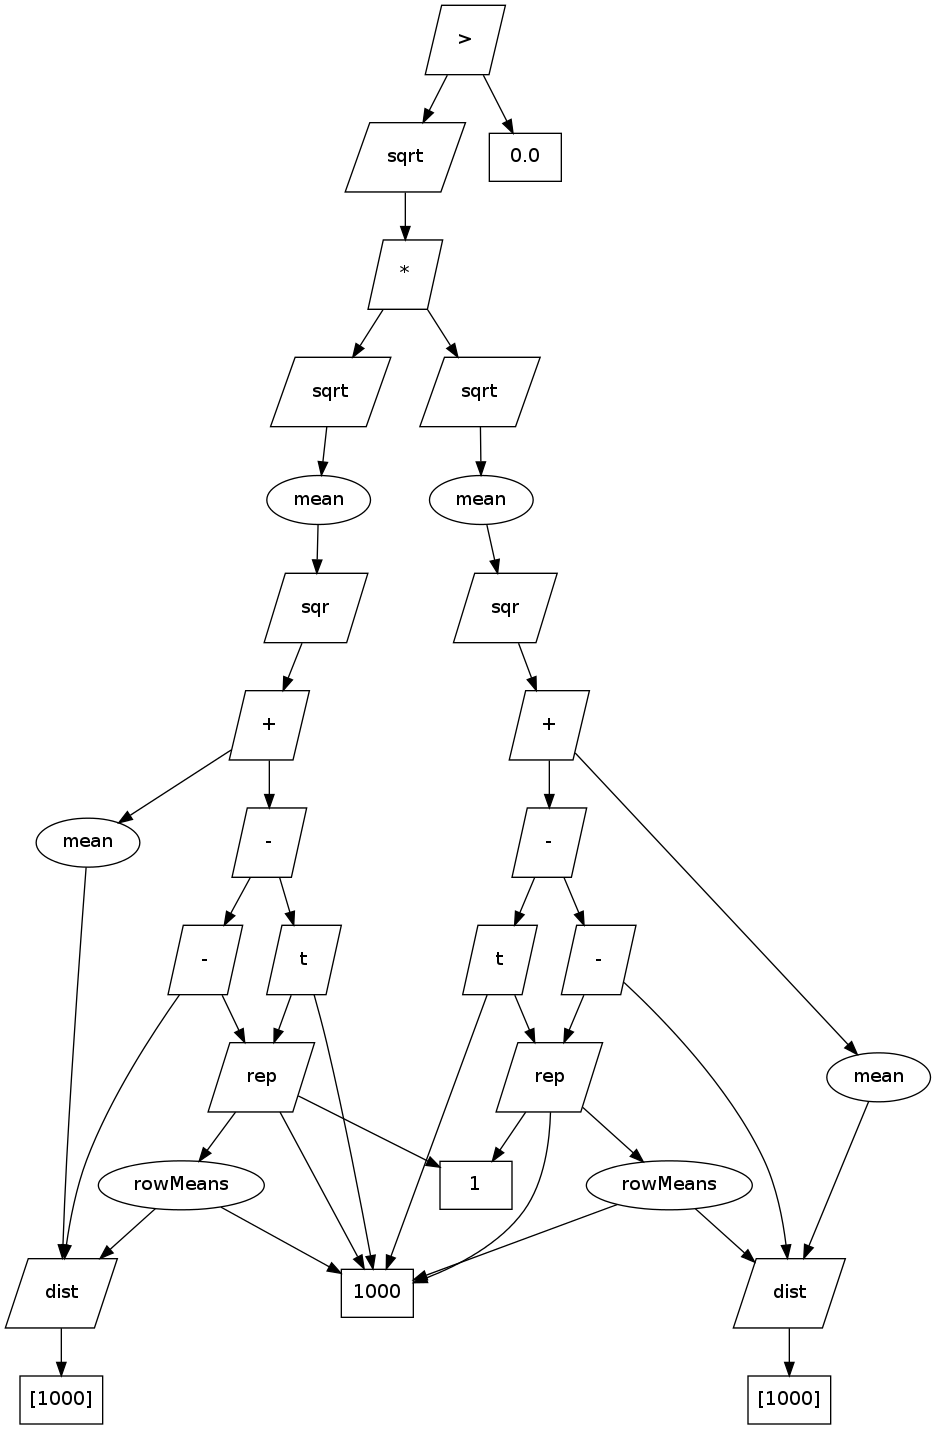 Directed Graph for the distance correlation calculation